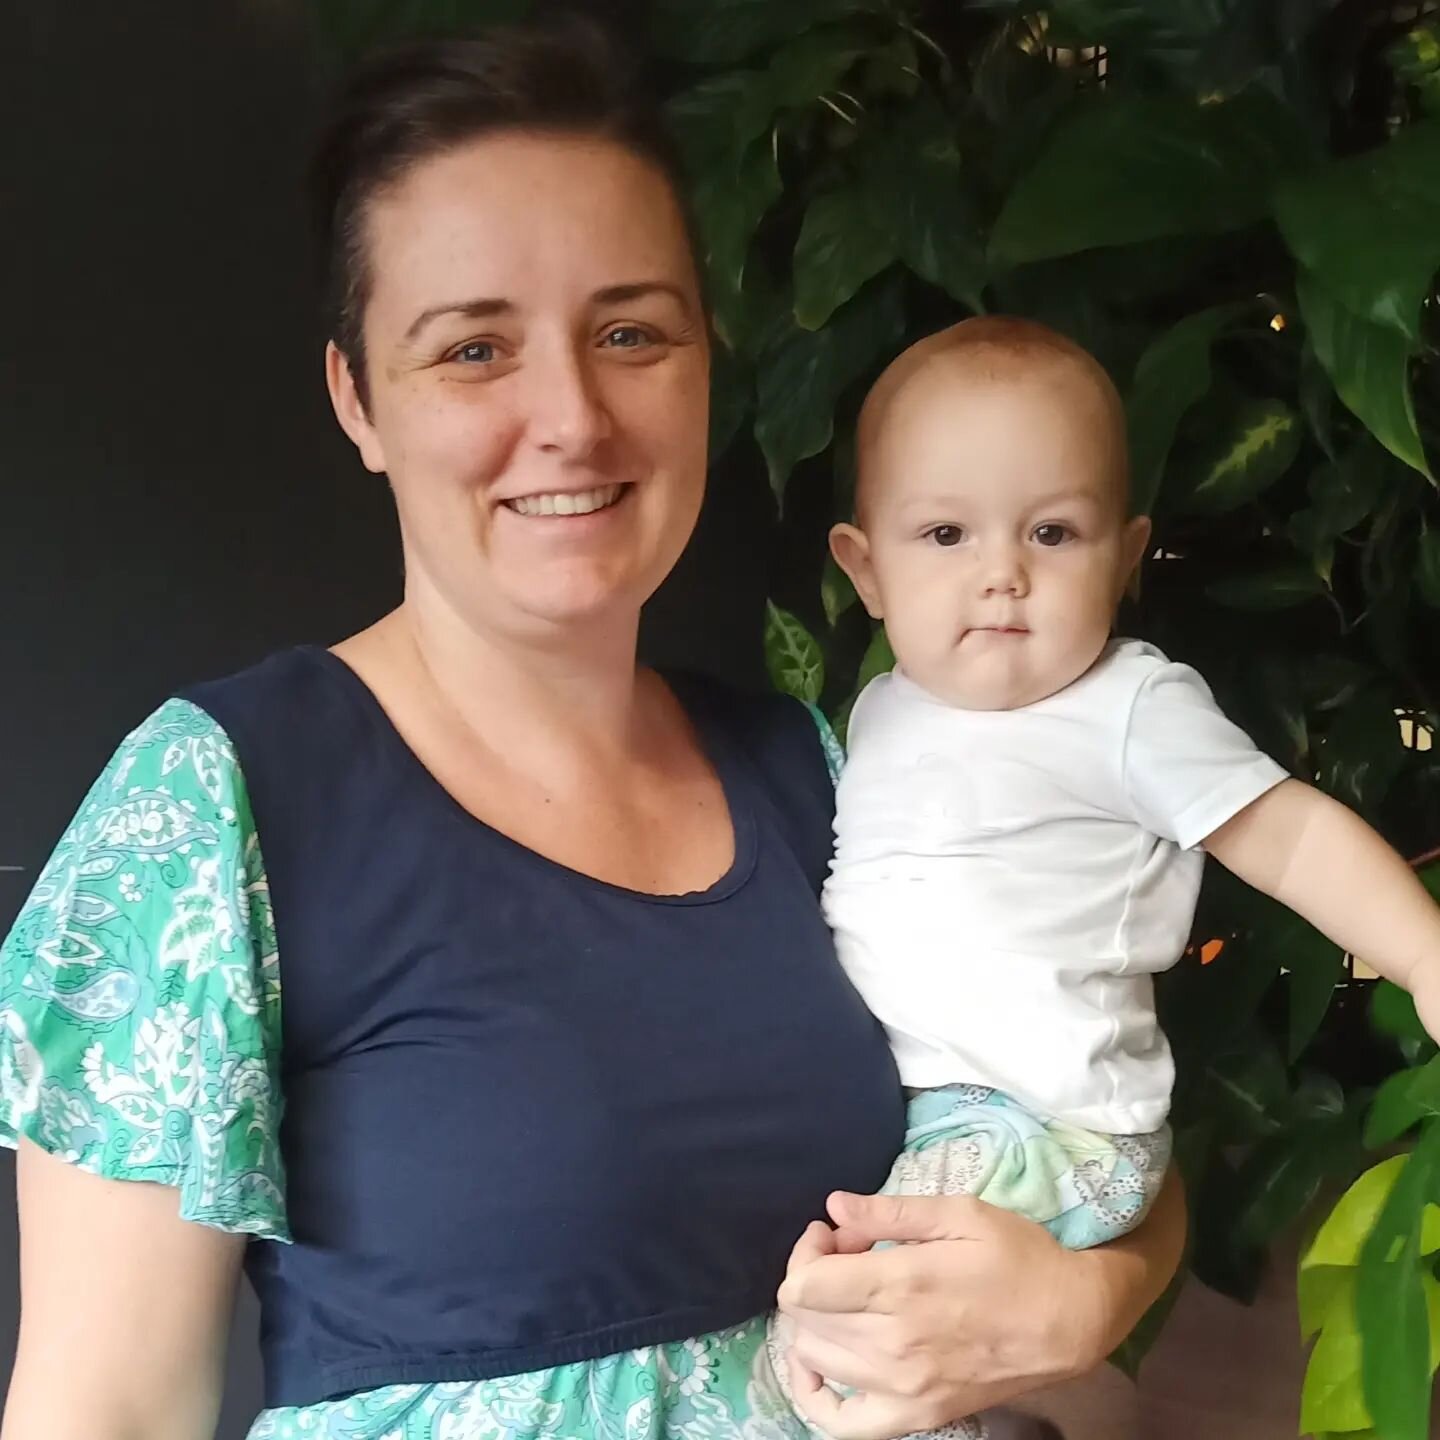 Hi there! It's been a while since I've done an intro post, so here goes, and I'm also celebrating reaching 3,456 followers - thank you to each of you!

I'm Debbie Jay, founder of The Mama Circle, and co-founder of The Gentle Breastfeeder support grou